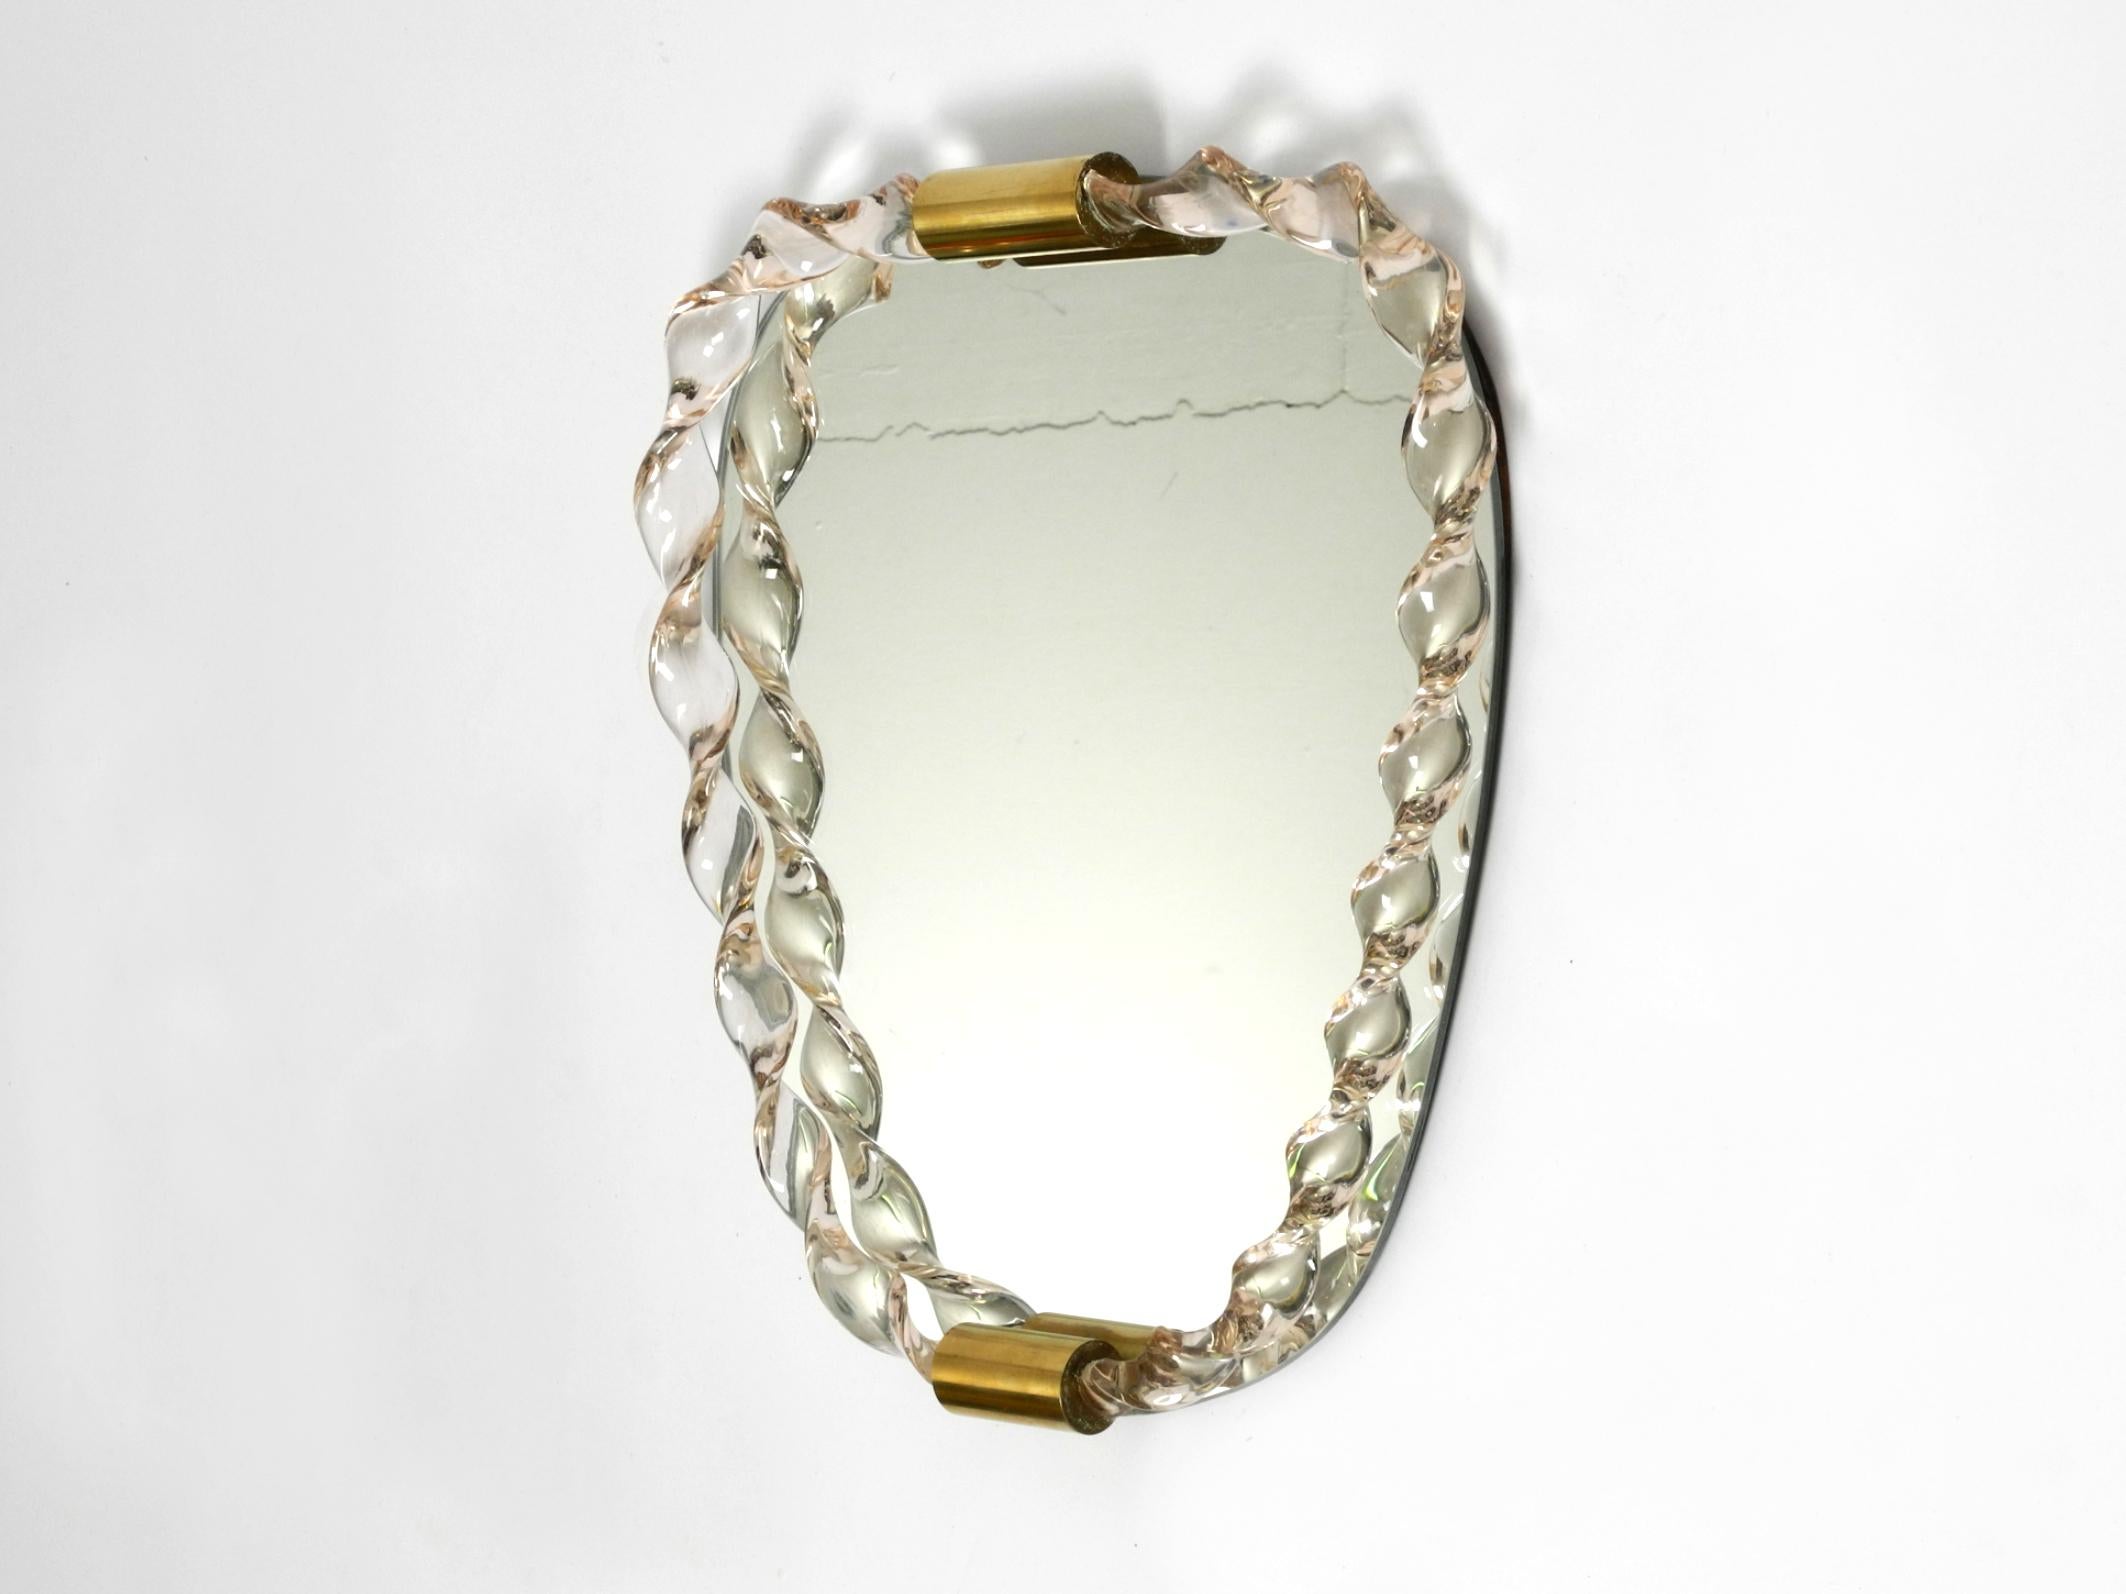 Mid-Century Modern Fantastically beautiful 1960s wall mirror with a heavy Murano glass frame